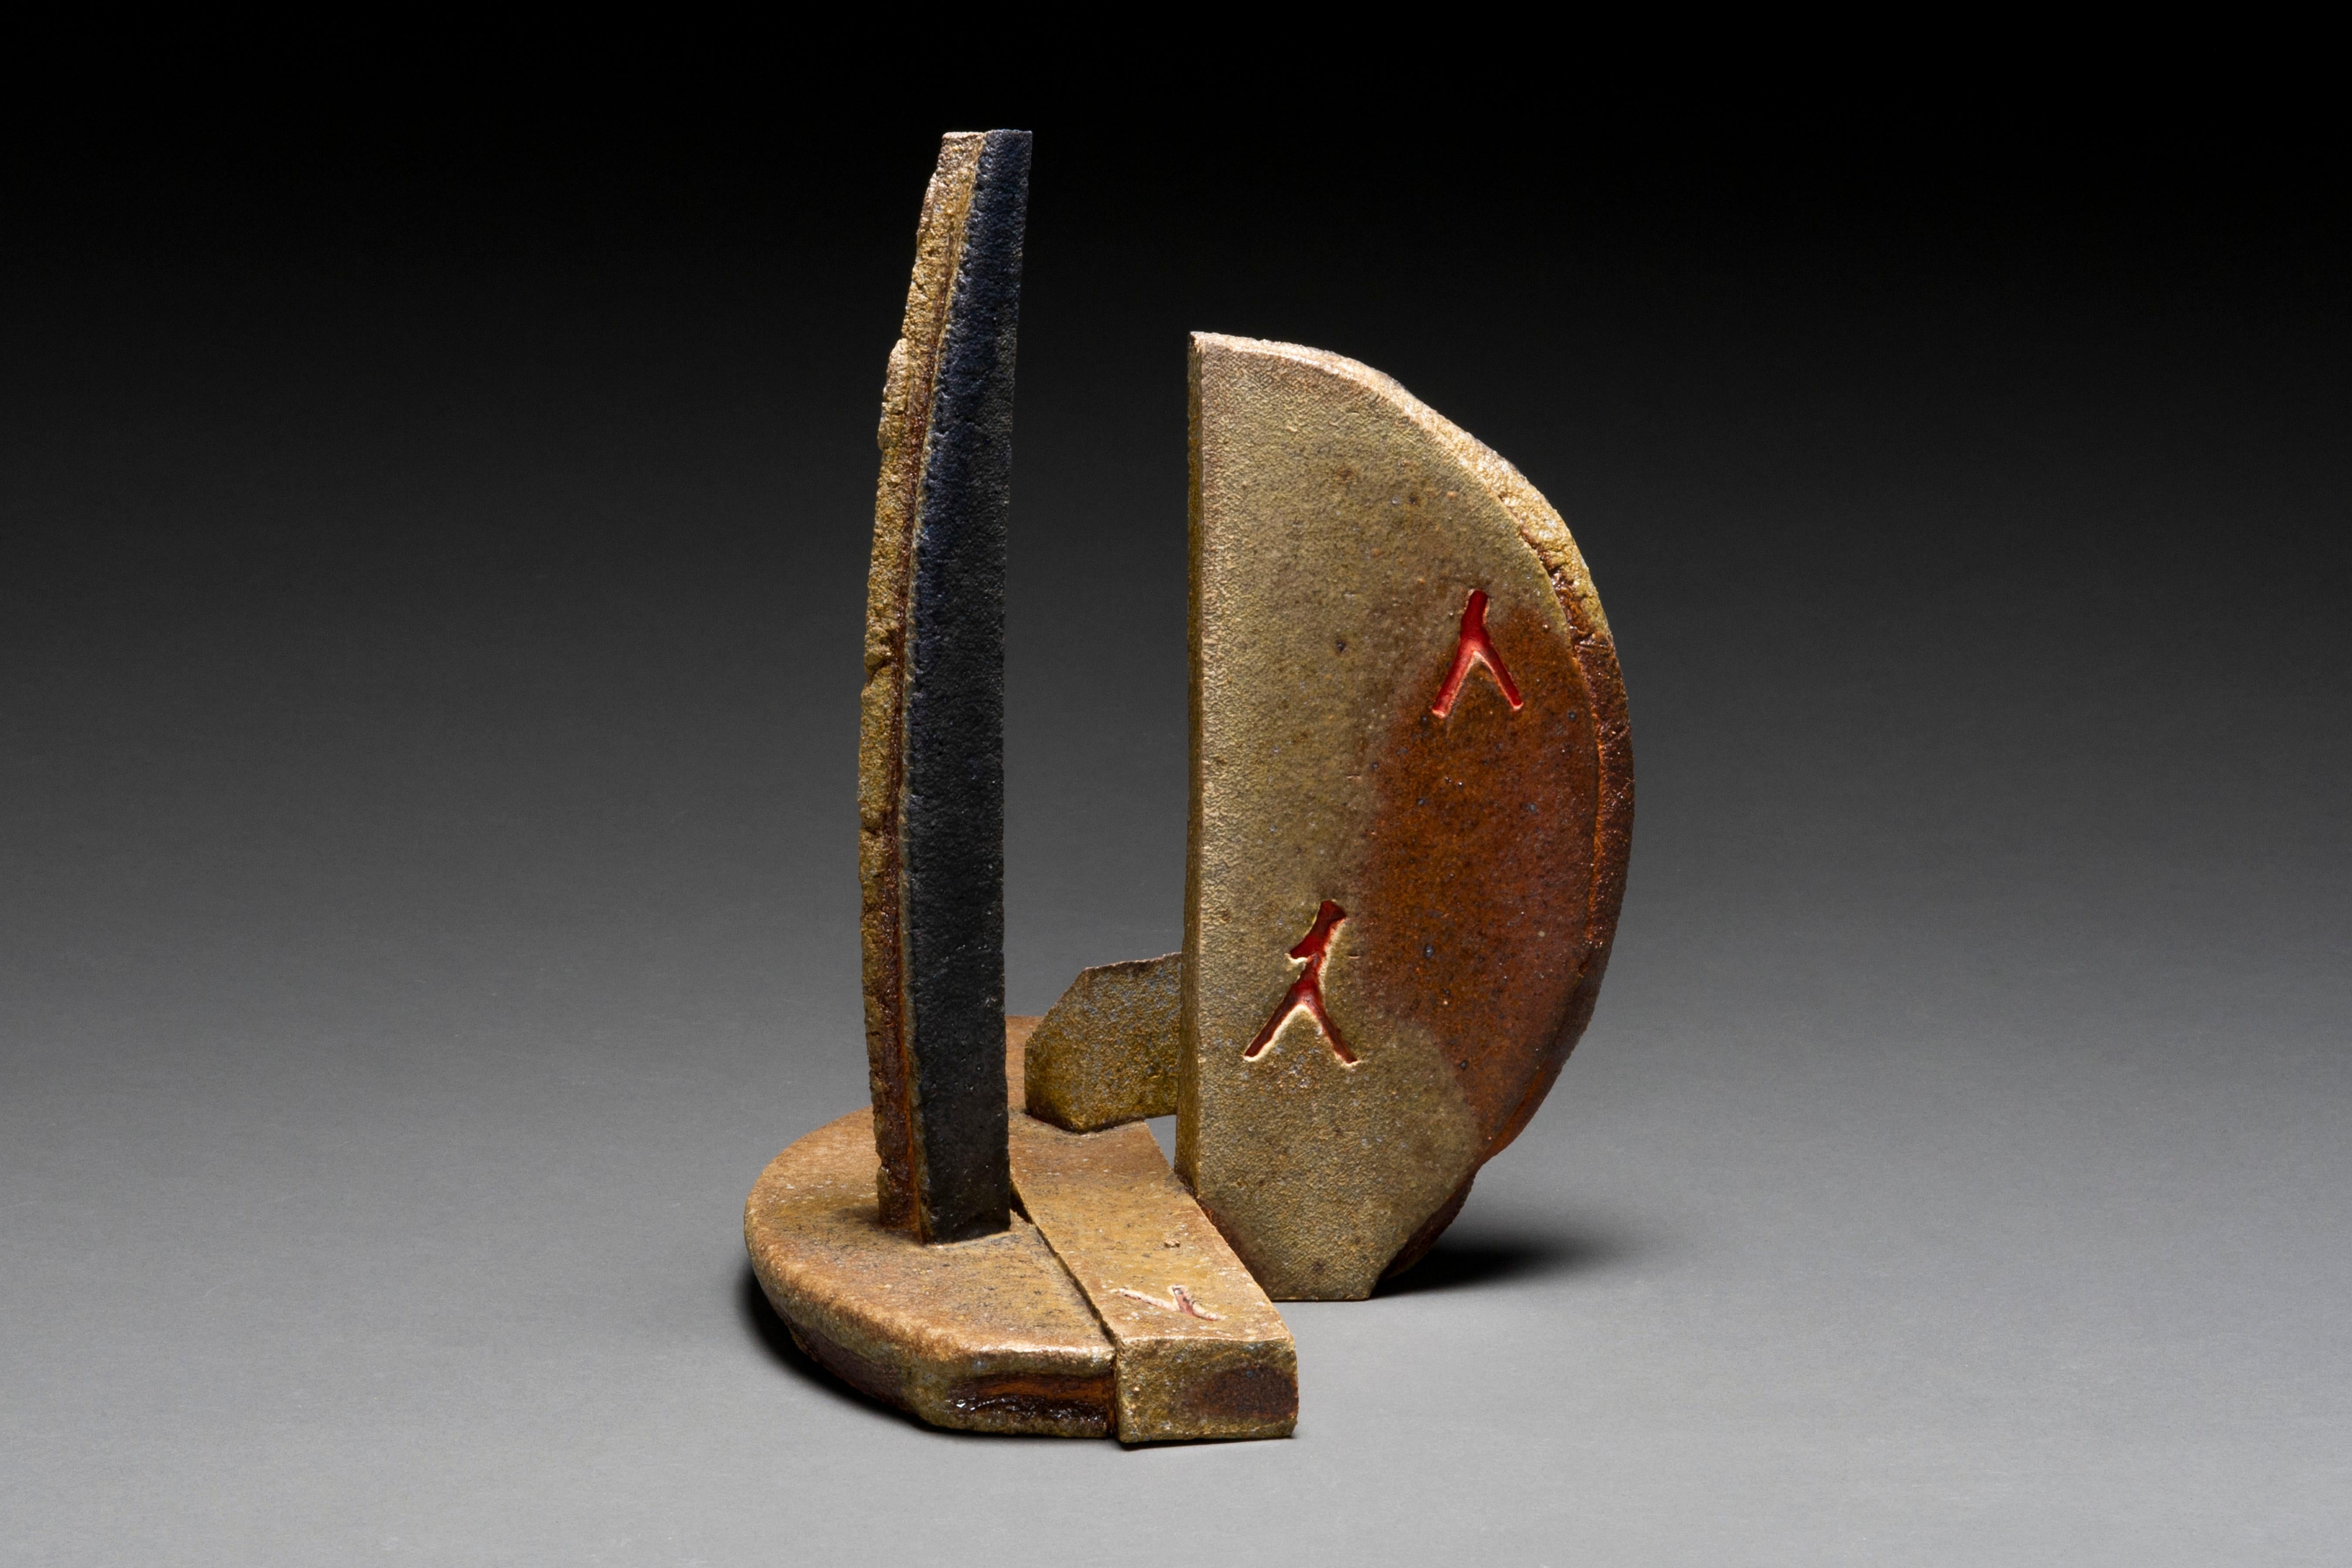 Wood-fired ceramic abstract sculpture: 'One' - Black Abstract Sculpture by Tony Moore